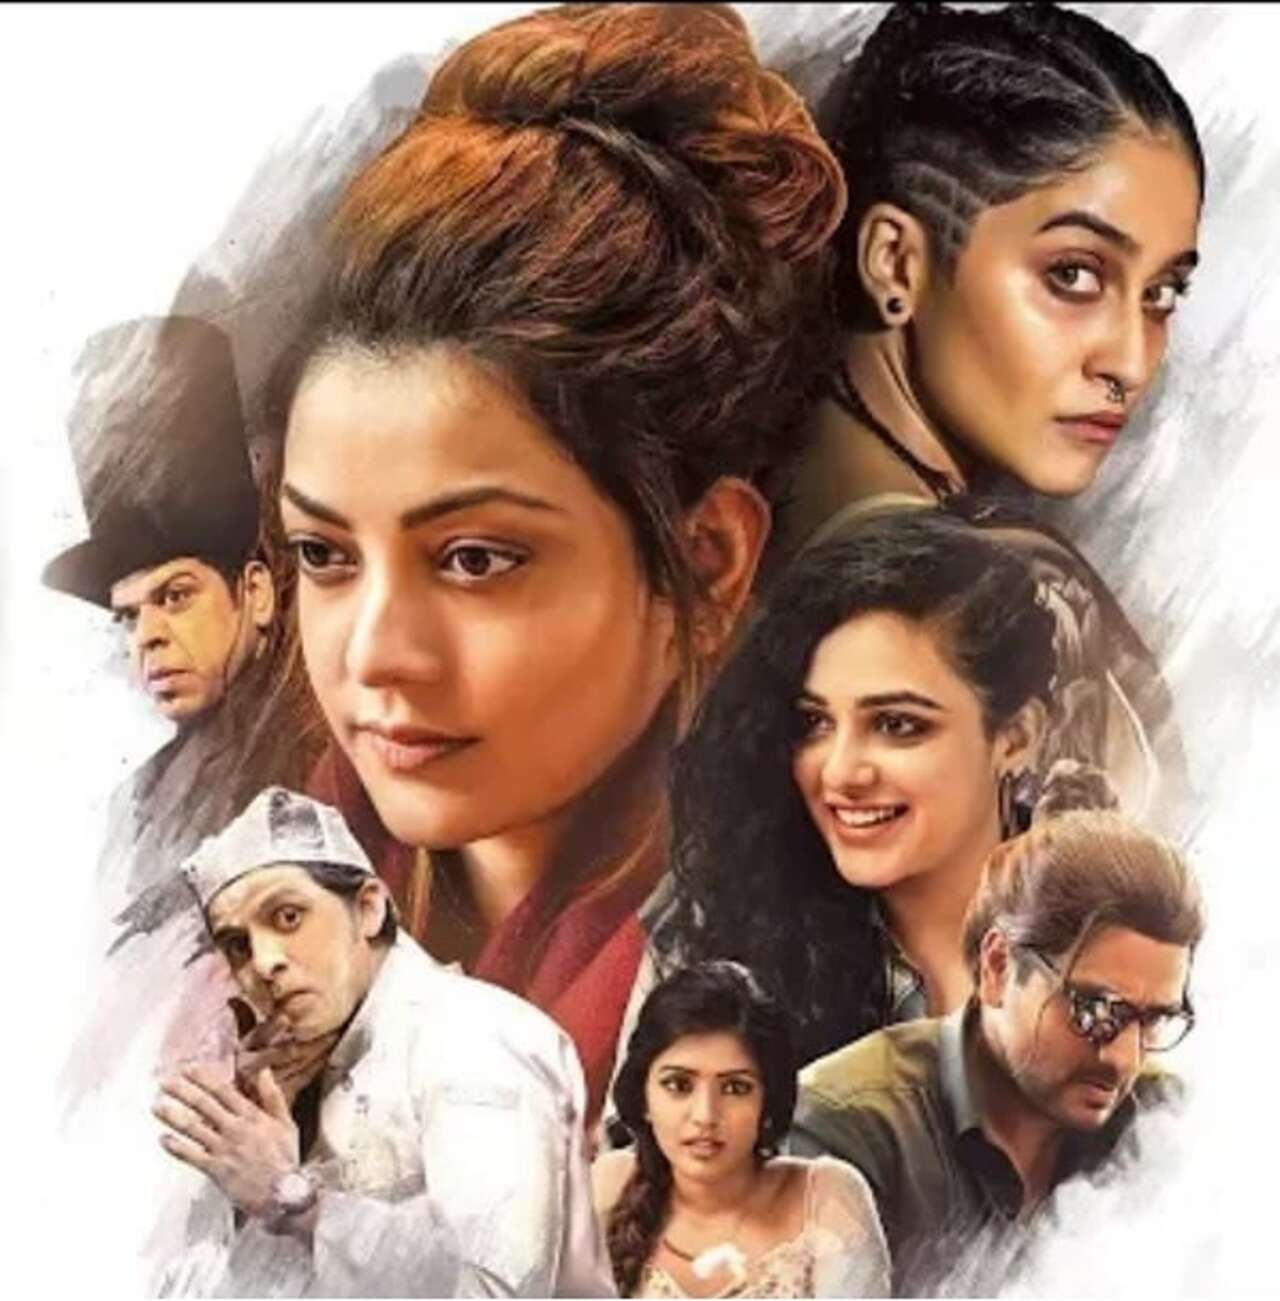 Awe! 
Directed by Prashanth Varma, 'Awe' revolves around a heist at a restaurant. Among the hostages are Radha and Krish, a lesbian couple who are planning to get married. During the heist, Radha introduces Krish to her parents as her partner. Her parents are taken aback after they learn that Krish is a woman. While the couple are not the central focus of the film, it gives a normal depiction of same-sex relationship and treats it like any other relationship. 